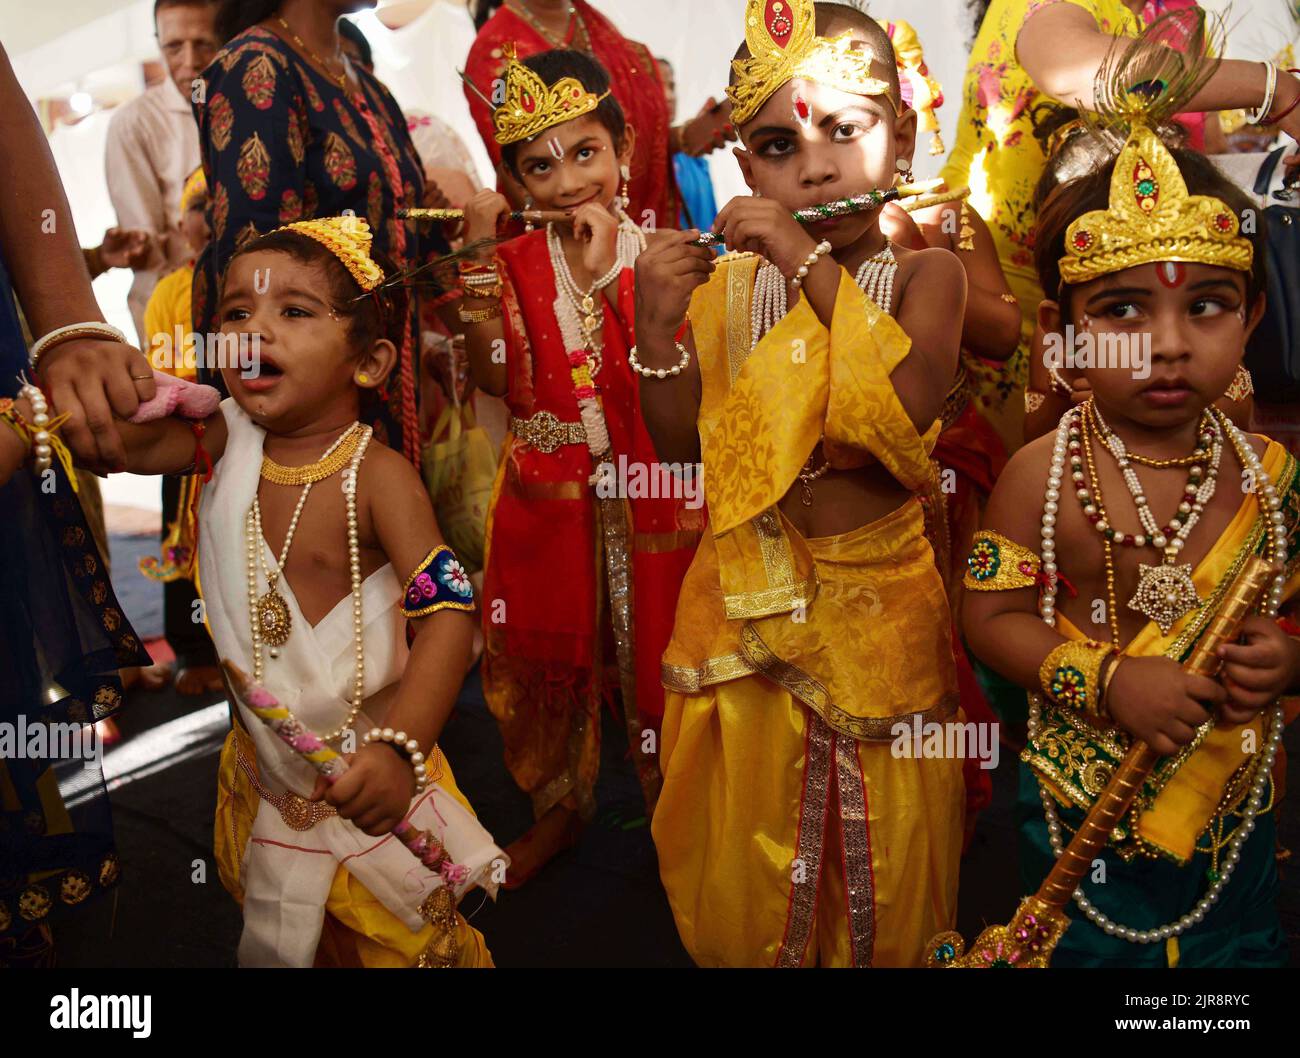 Children dressed as Lord Krishna participate in a dress competition ...